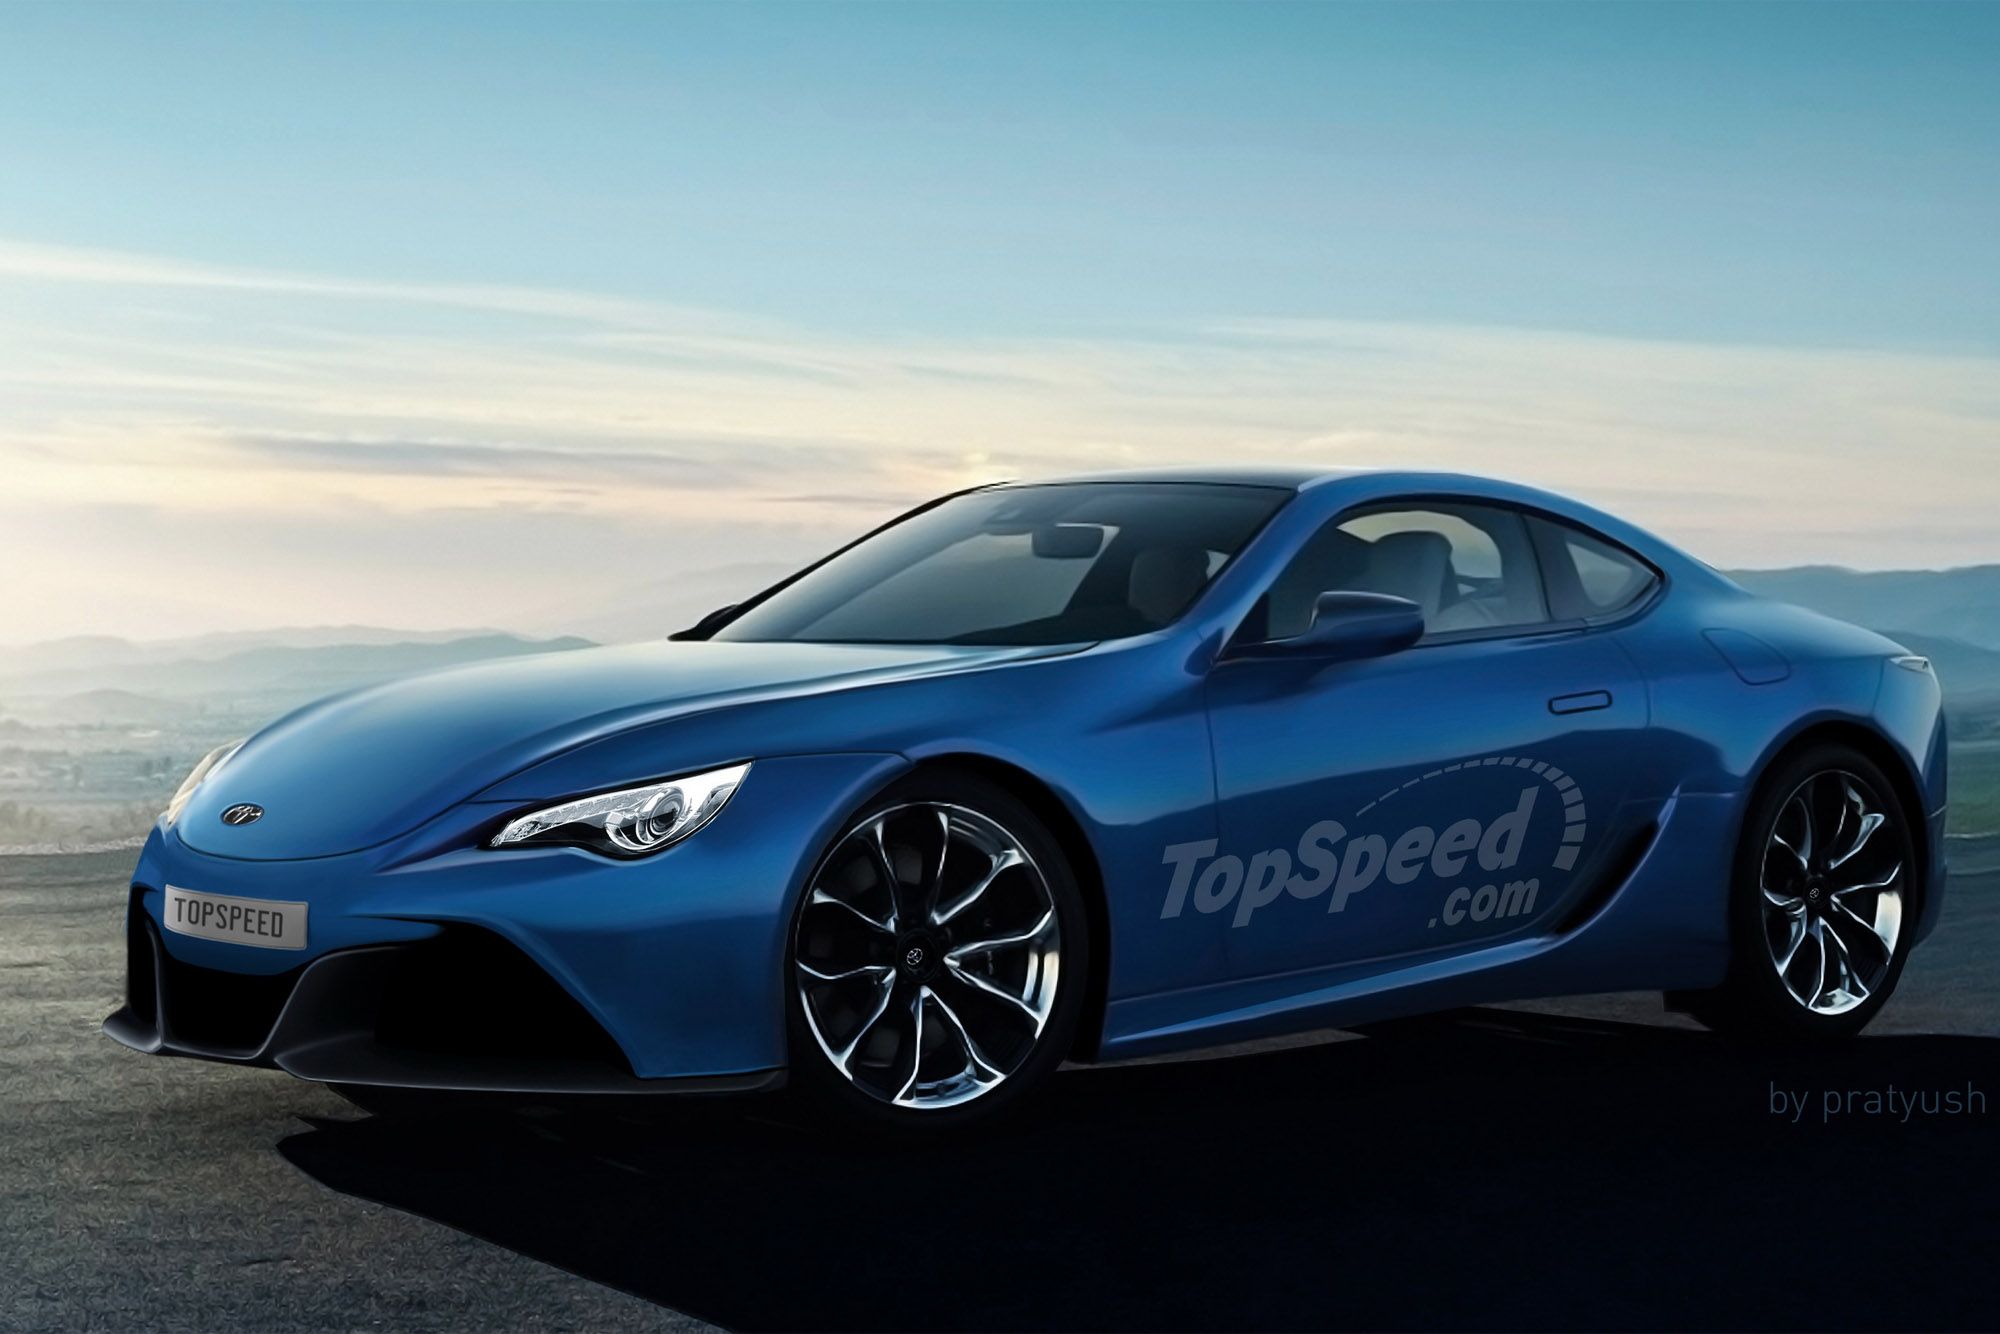 2018 The Toyota Supra Will Probably Have More Power Than We Thought, but Toyota Still Says No to a Manual Transmission